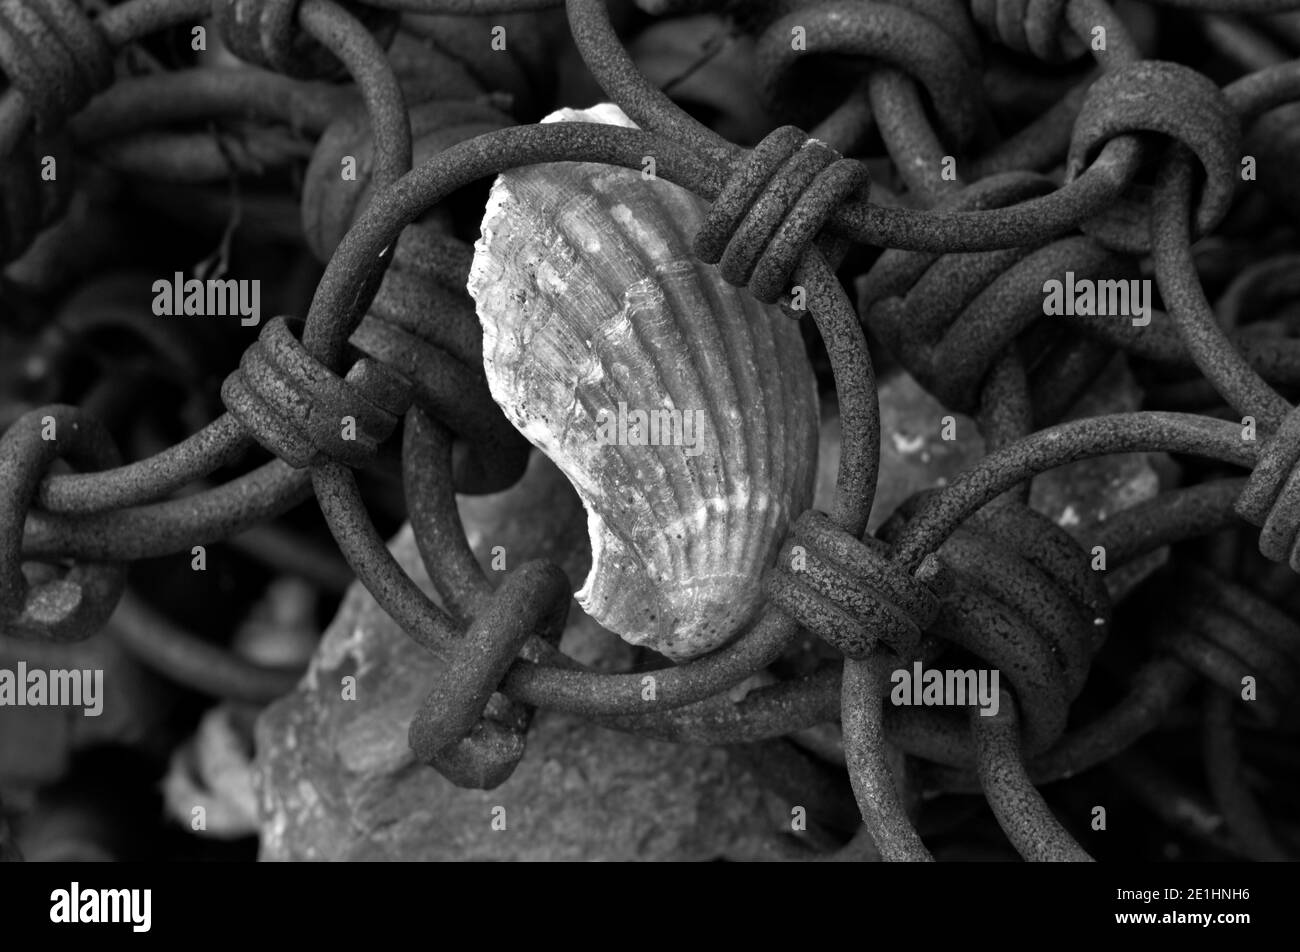 seashell trapped between rusty chains, black and white Stock Photo